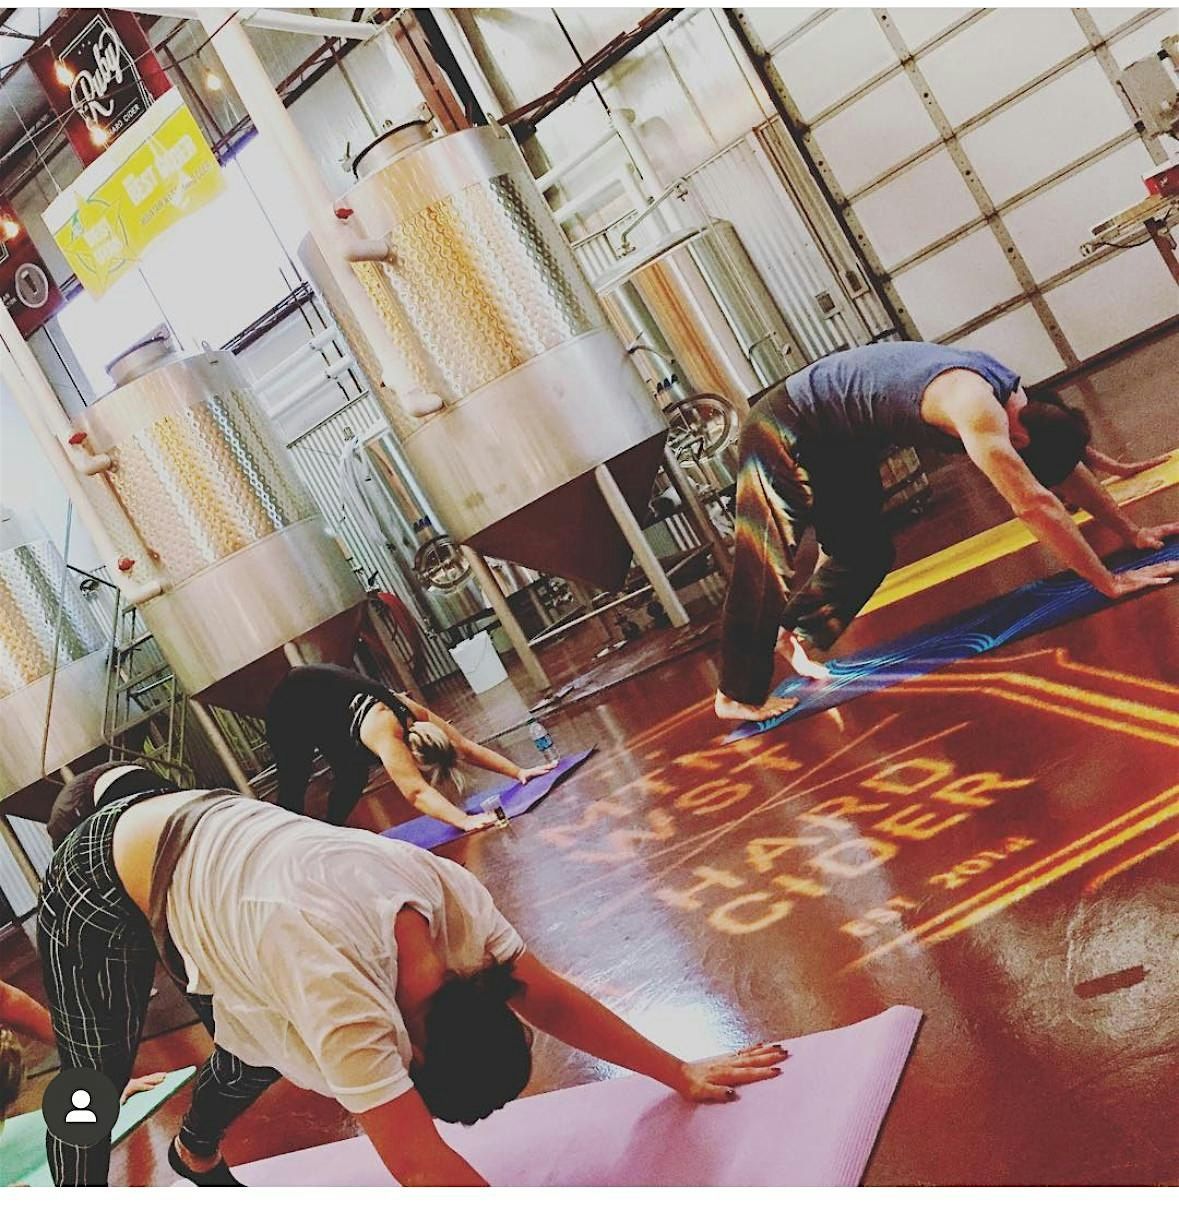 Yoga & Cider @ Mountain West Cidery